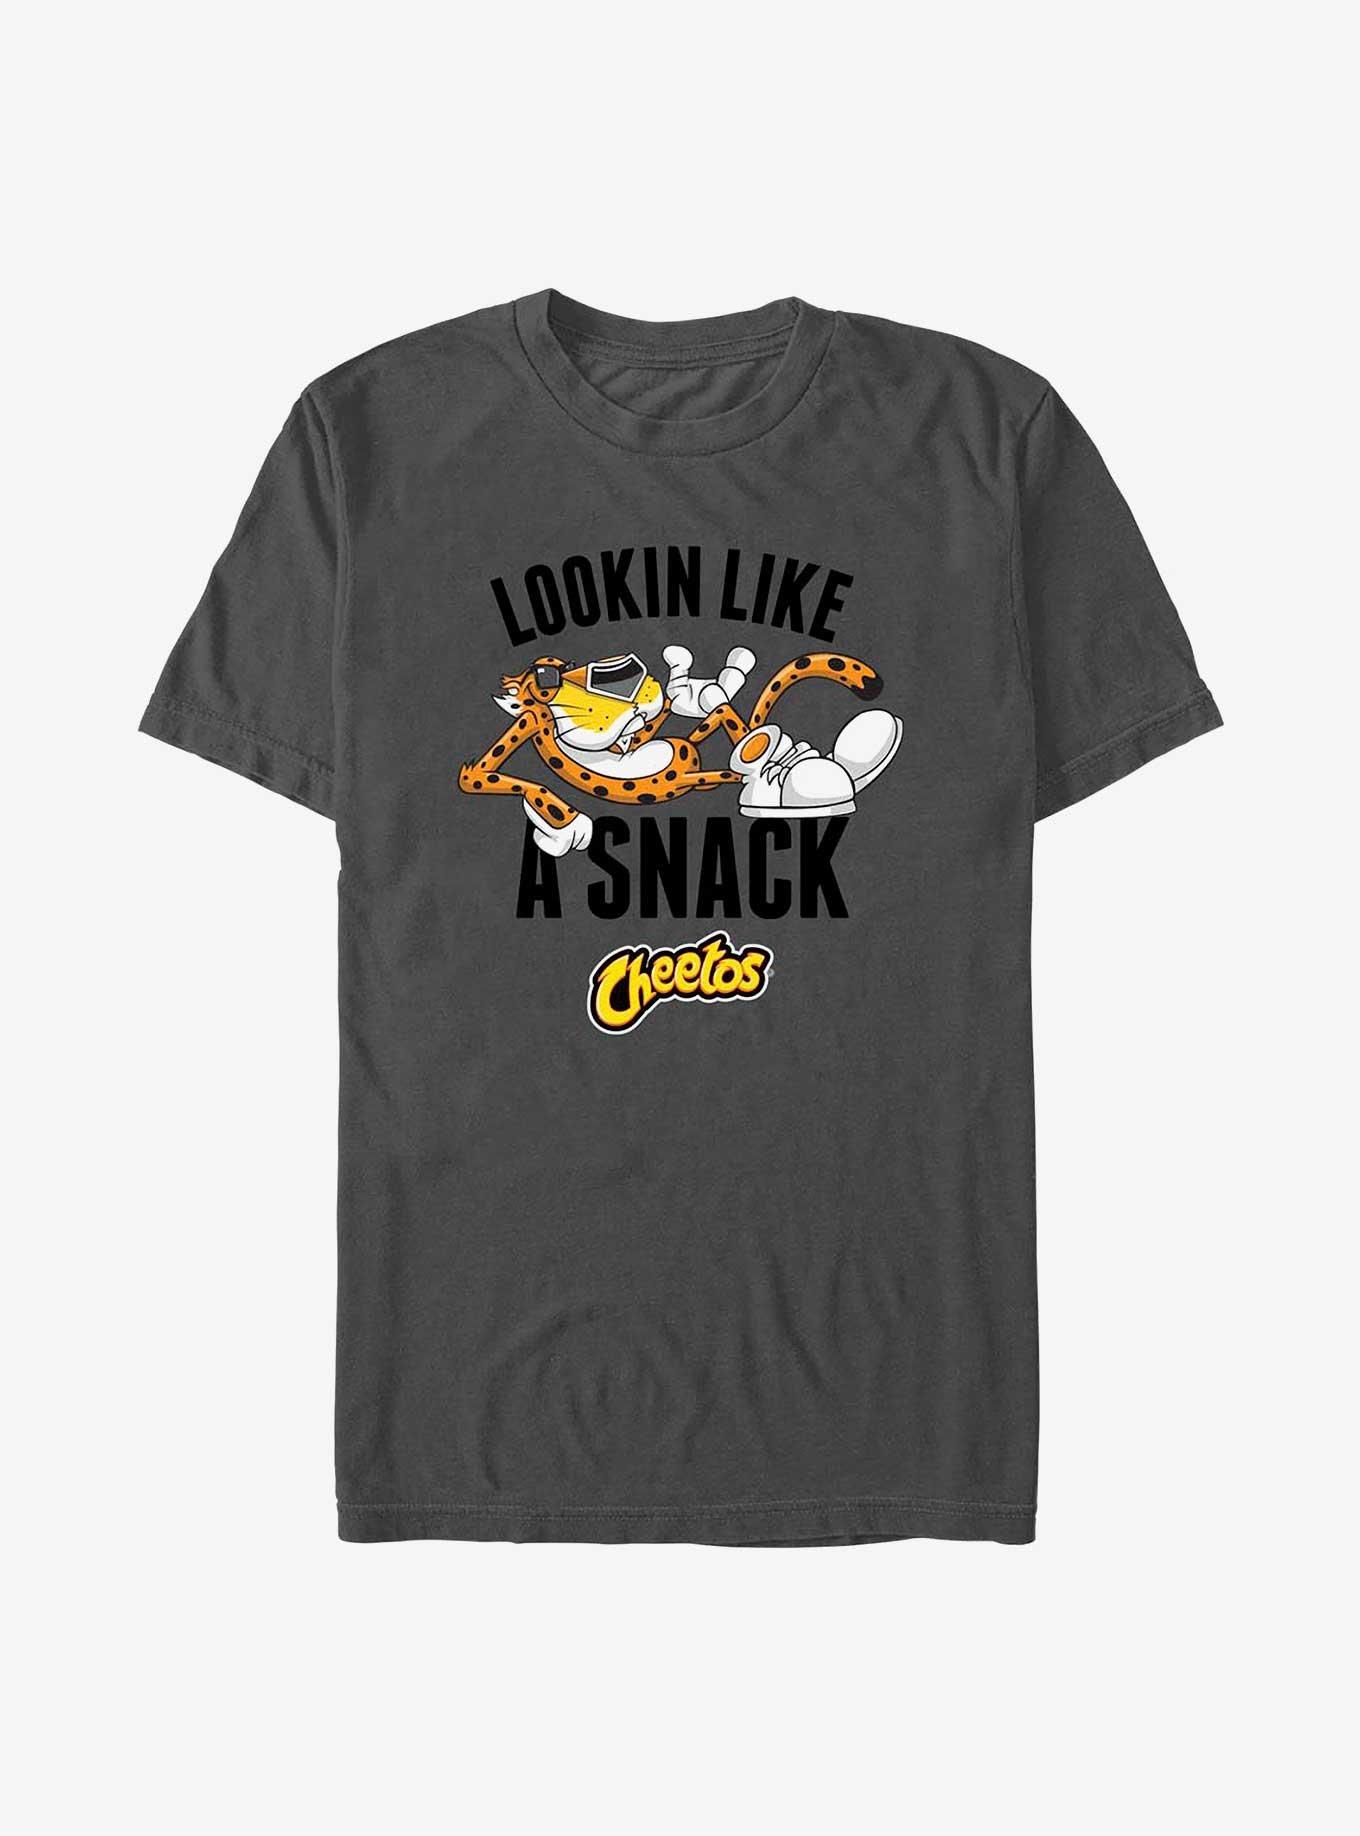 Cheetos Lookin' Like A Snack T-Shirt, CHARCOAL, hi-res